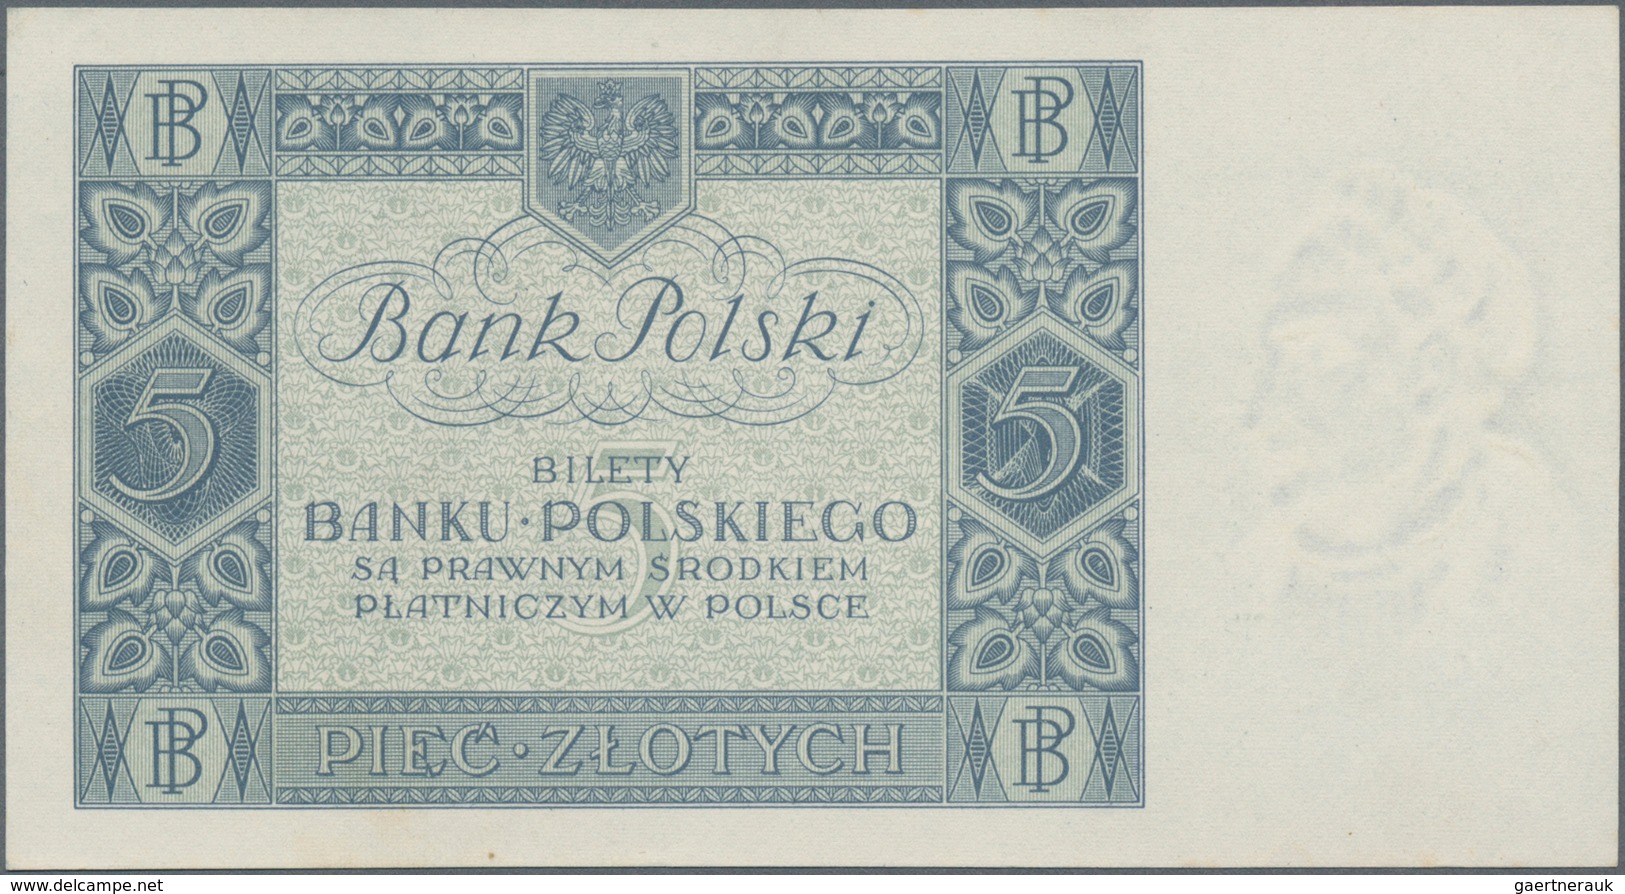 Poland / Polen: Set with 4 banknotes series 1931-34 with 5, 10, 20 and 100 Zlotych, P.69, 72, 73, 75